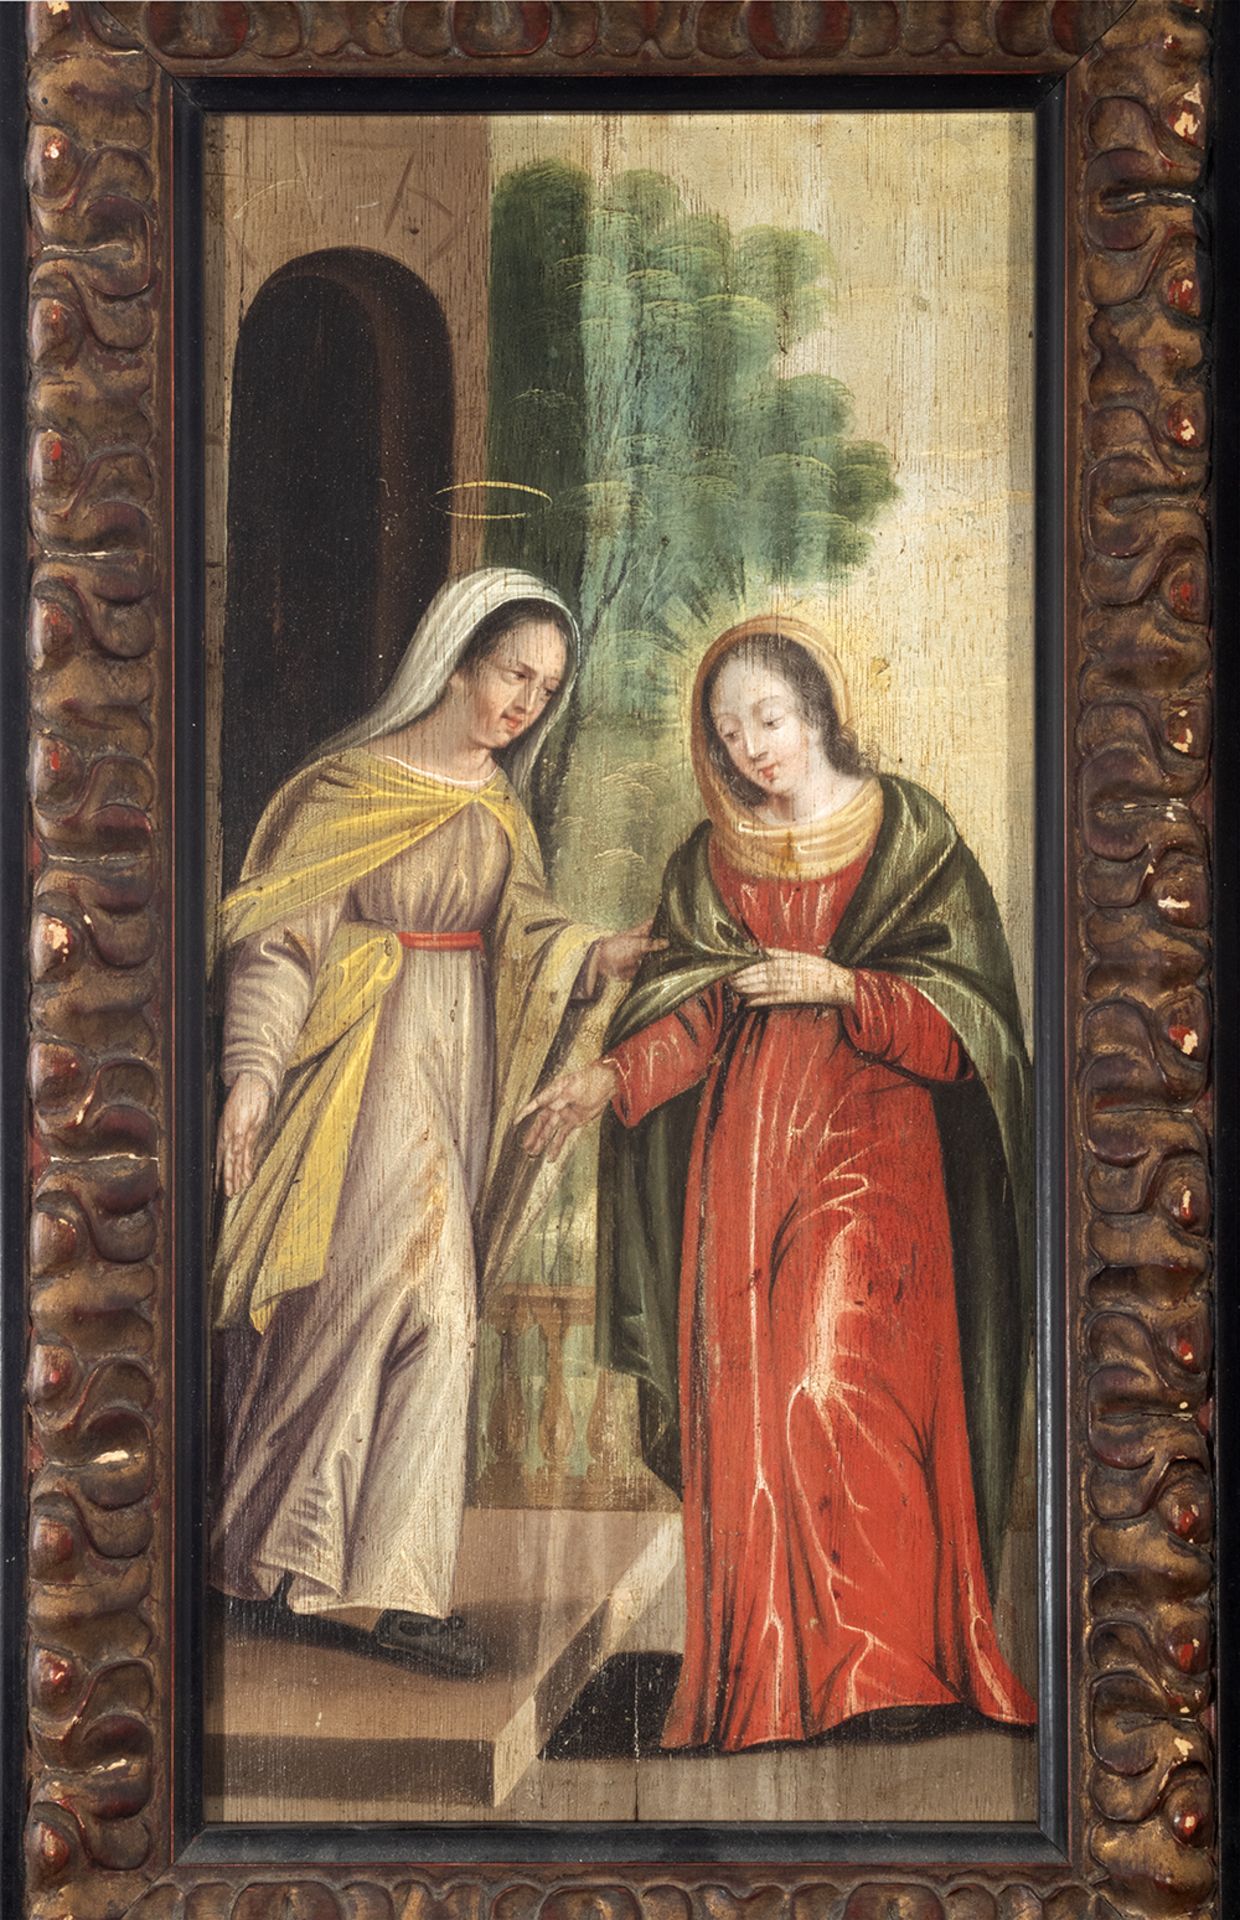 Flemish school, 17th century. The Baptism of Christ and The Visitation. - Image 2 of 9